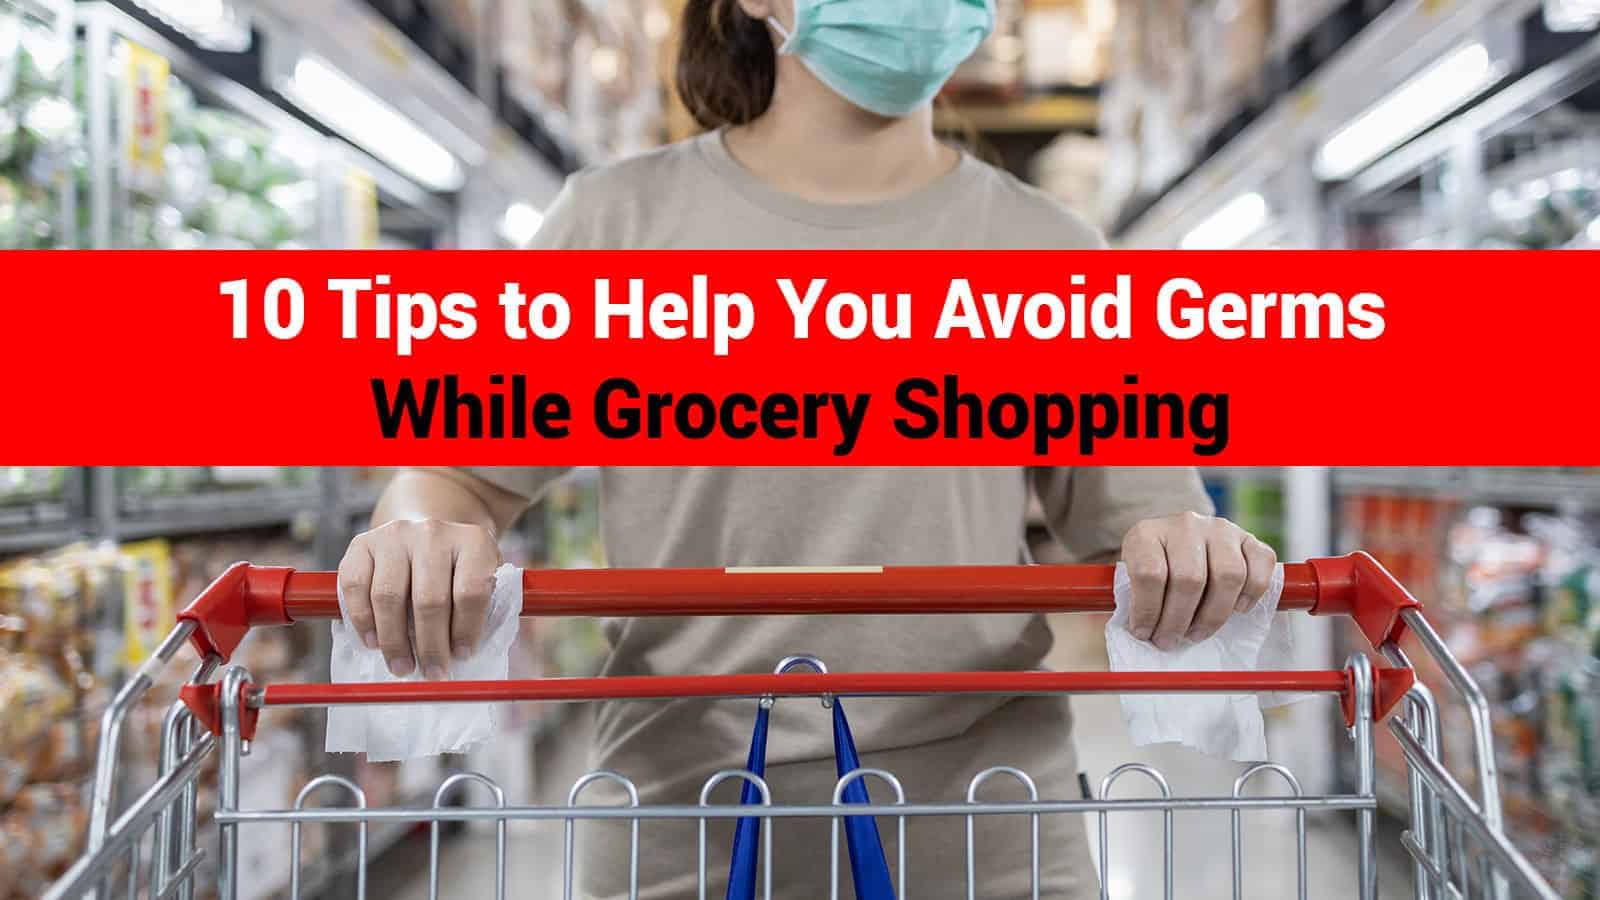 10 Tips to Help You Avoid Germs While Grocery Shopping